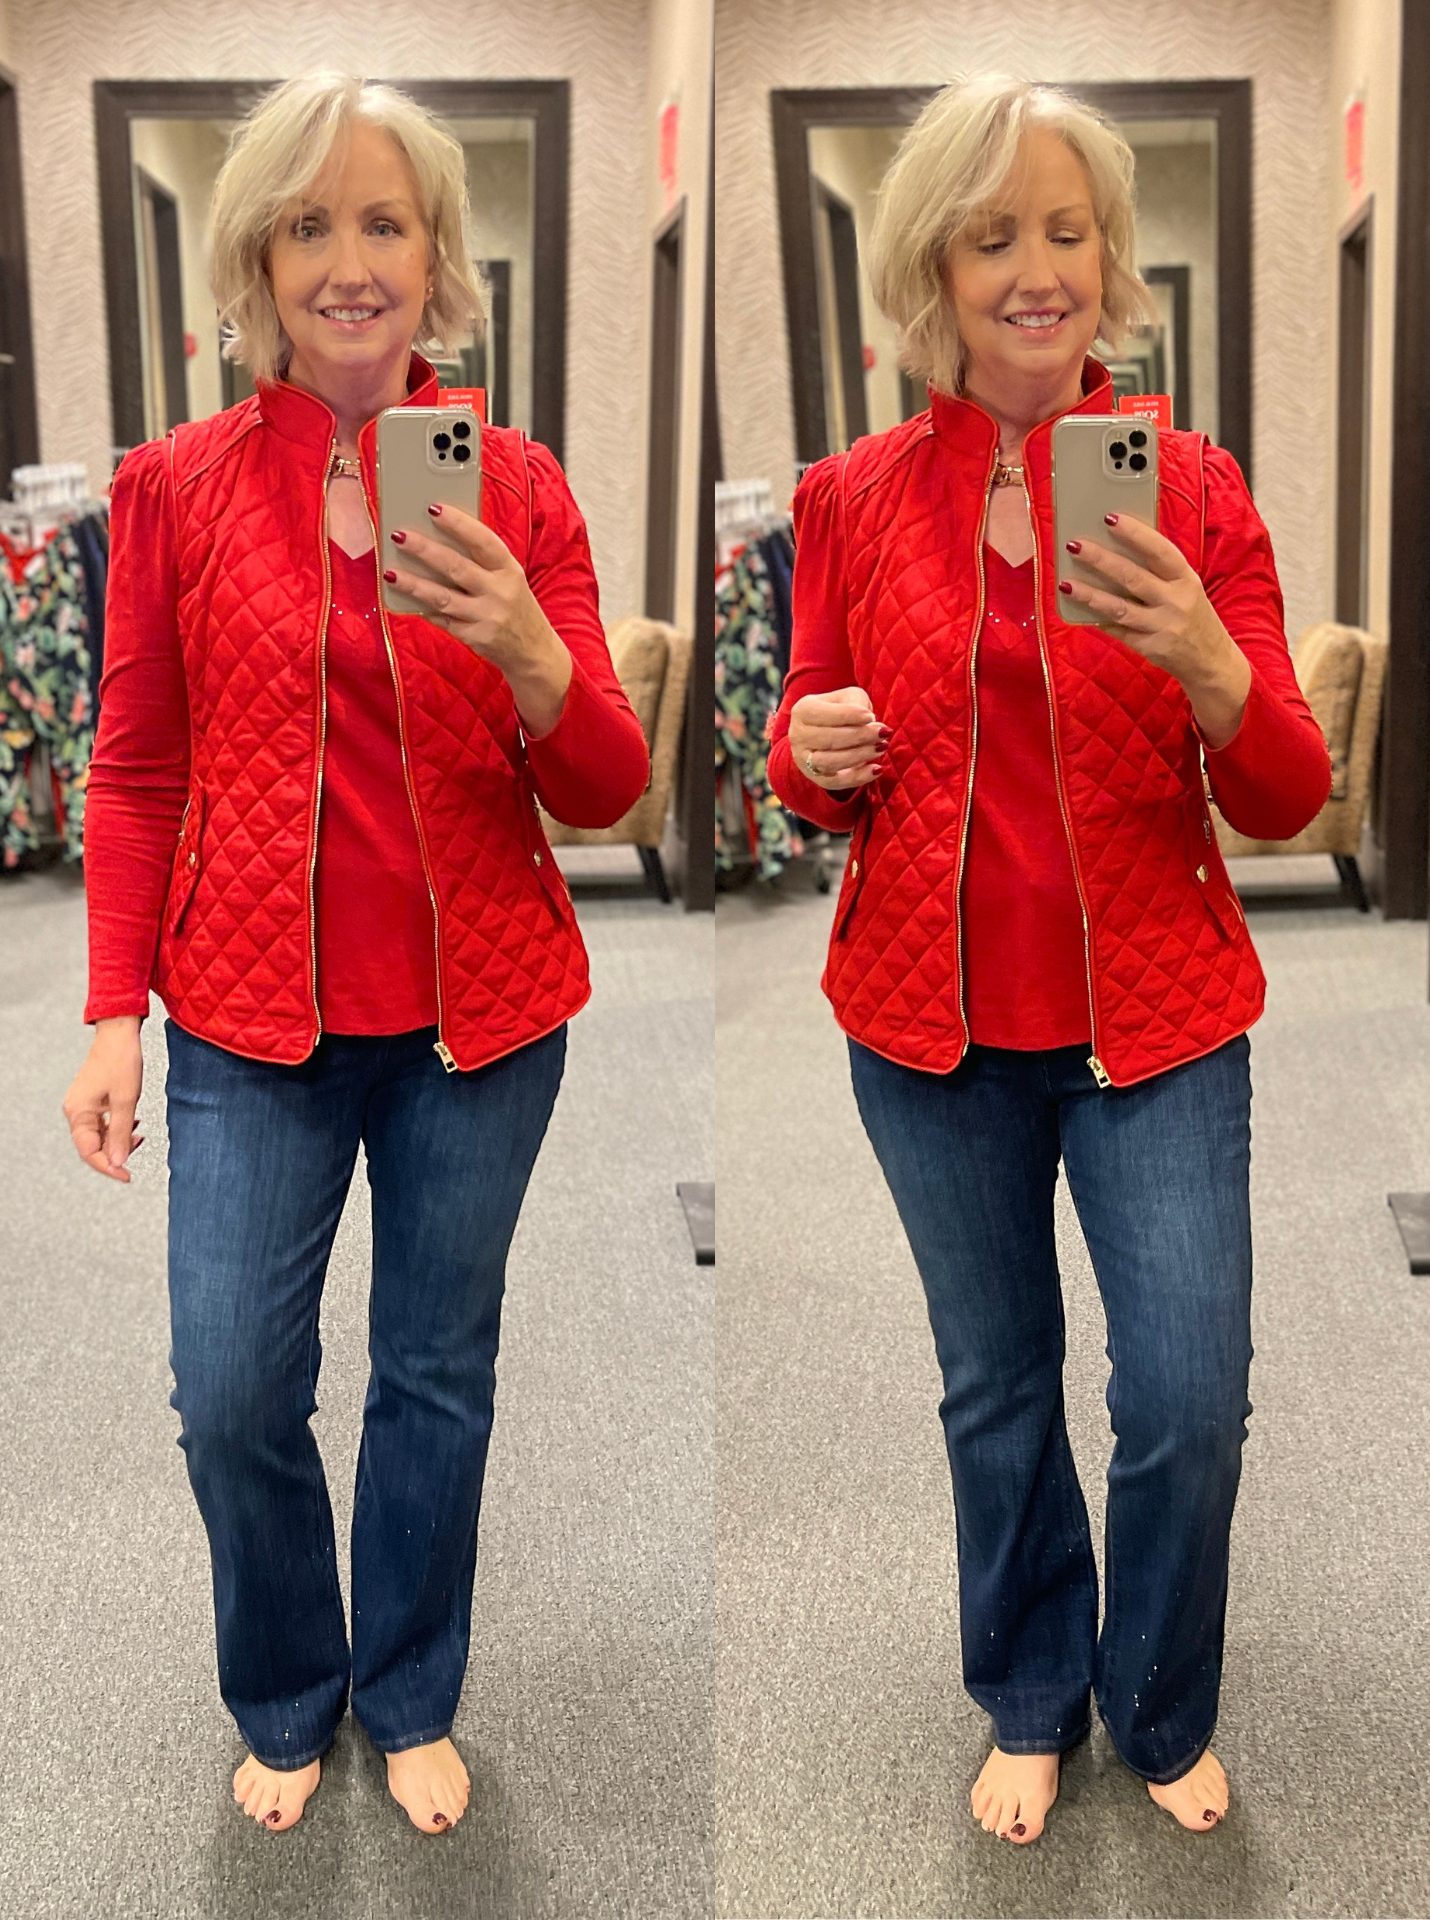 The Holiday Red Burnout Velvet Top